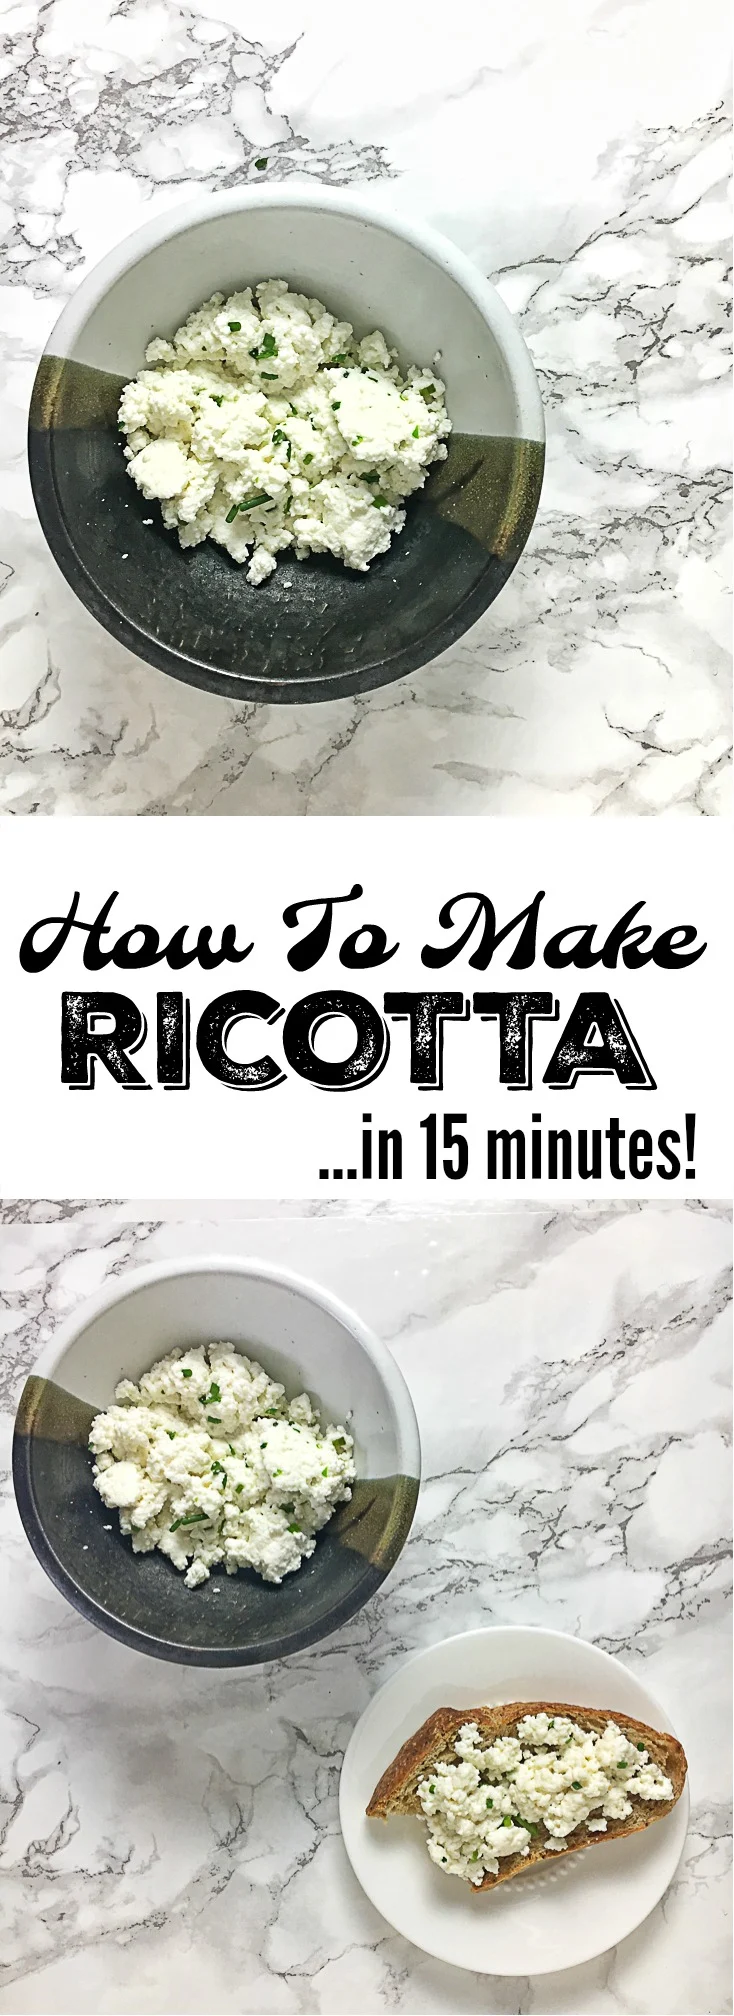 All you need is two ingredients, cheesecloth and 15 minutes to make homemade ricotta! Recipe at Teaspoonofspice.com